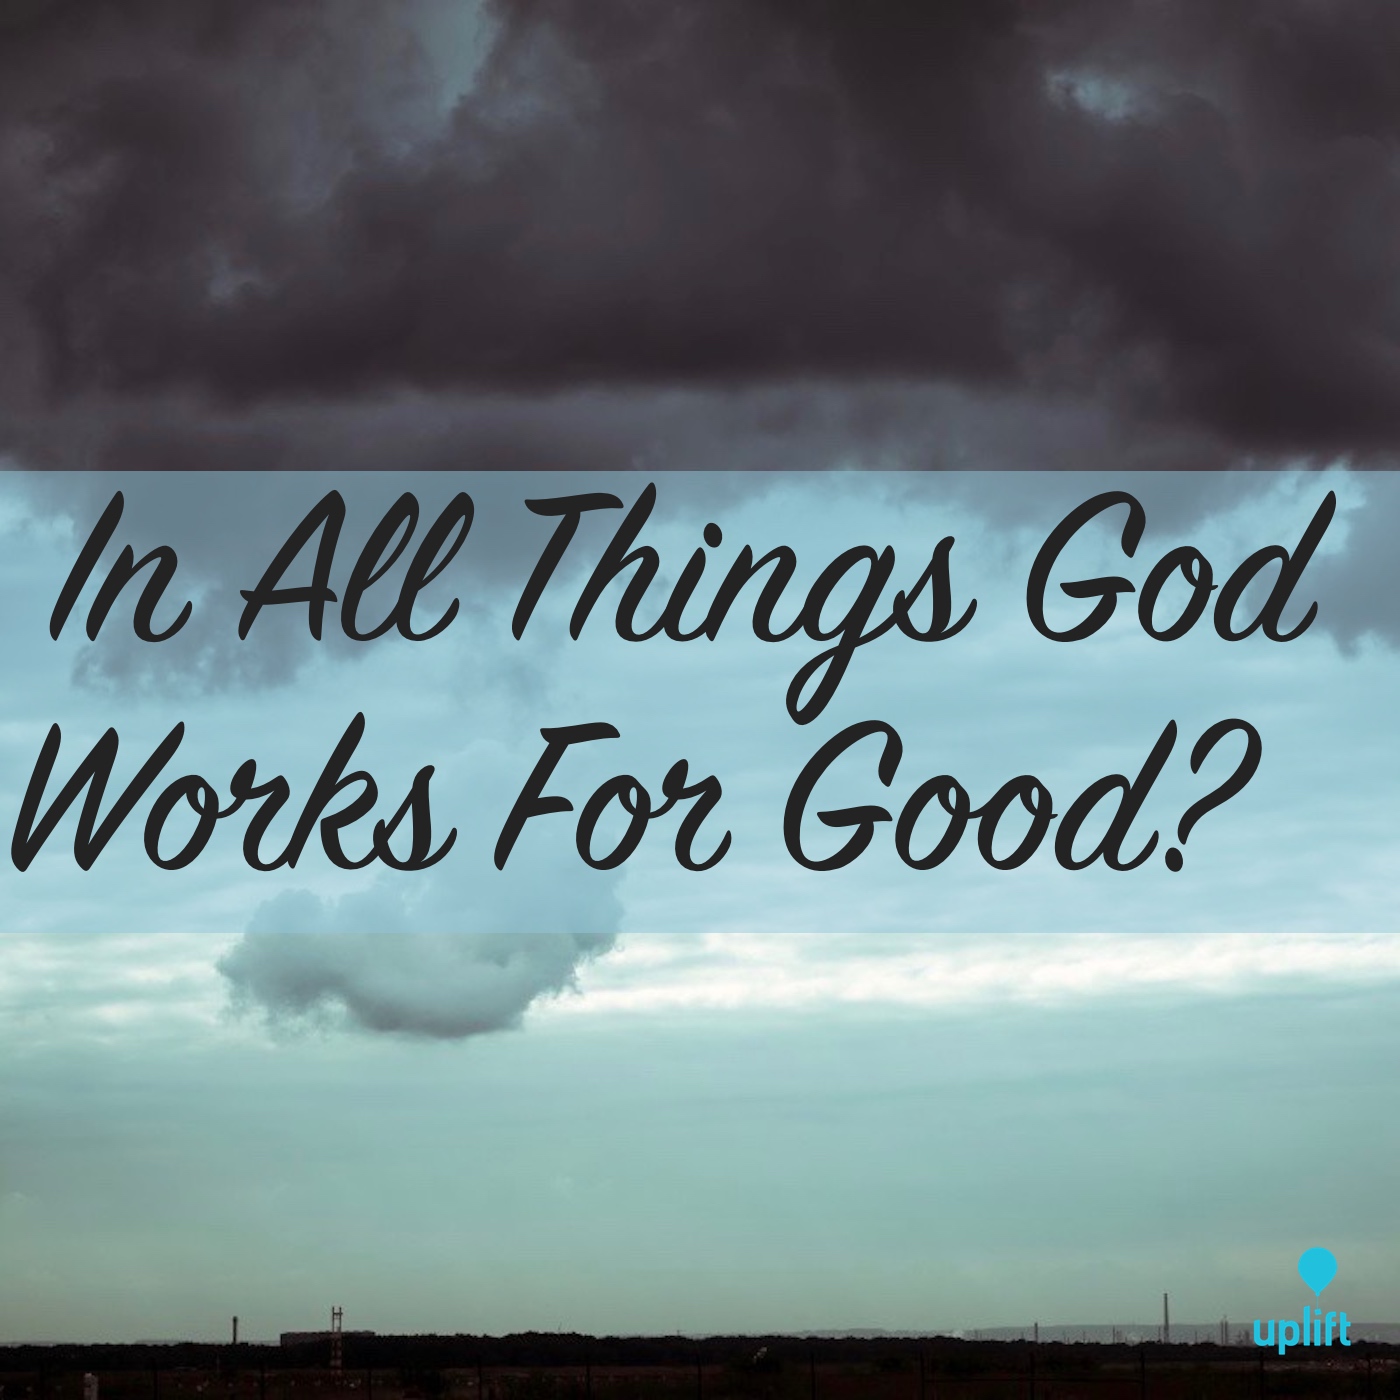 Episode 15: In All Things God Works For Good?